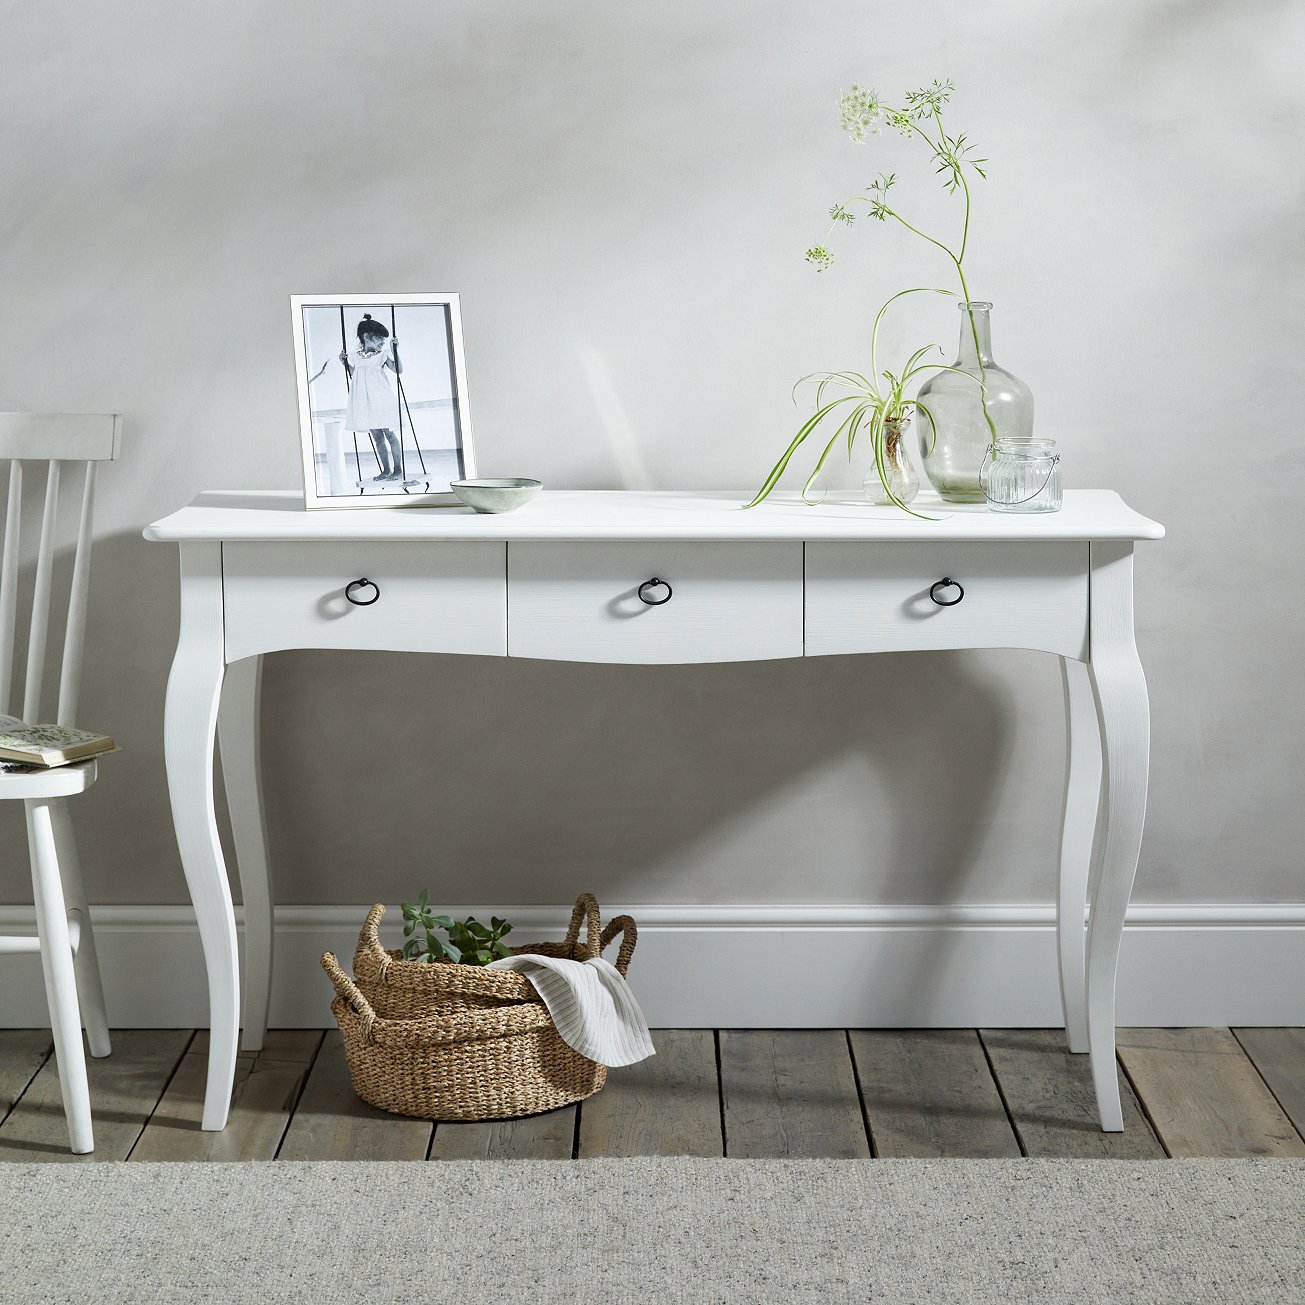 If you are looking to add a dab of understated elegance and style to your hallway, then look no further than the Provence Console Table. The vintage French design has all the curves you could desire with three deep drawers for storage. - £450.00